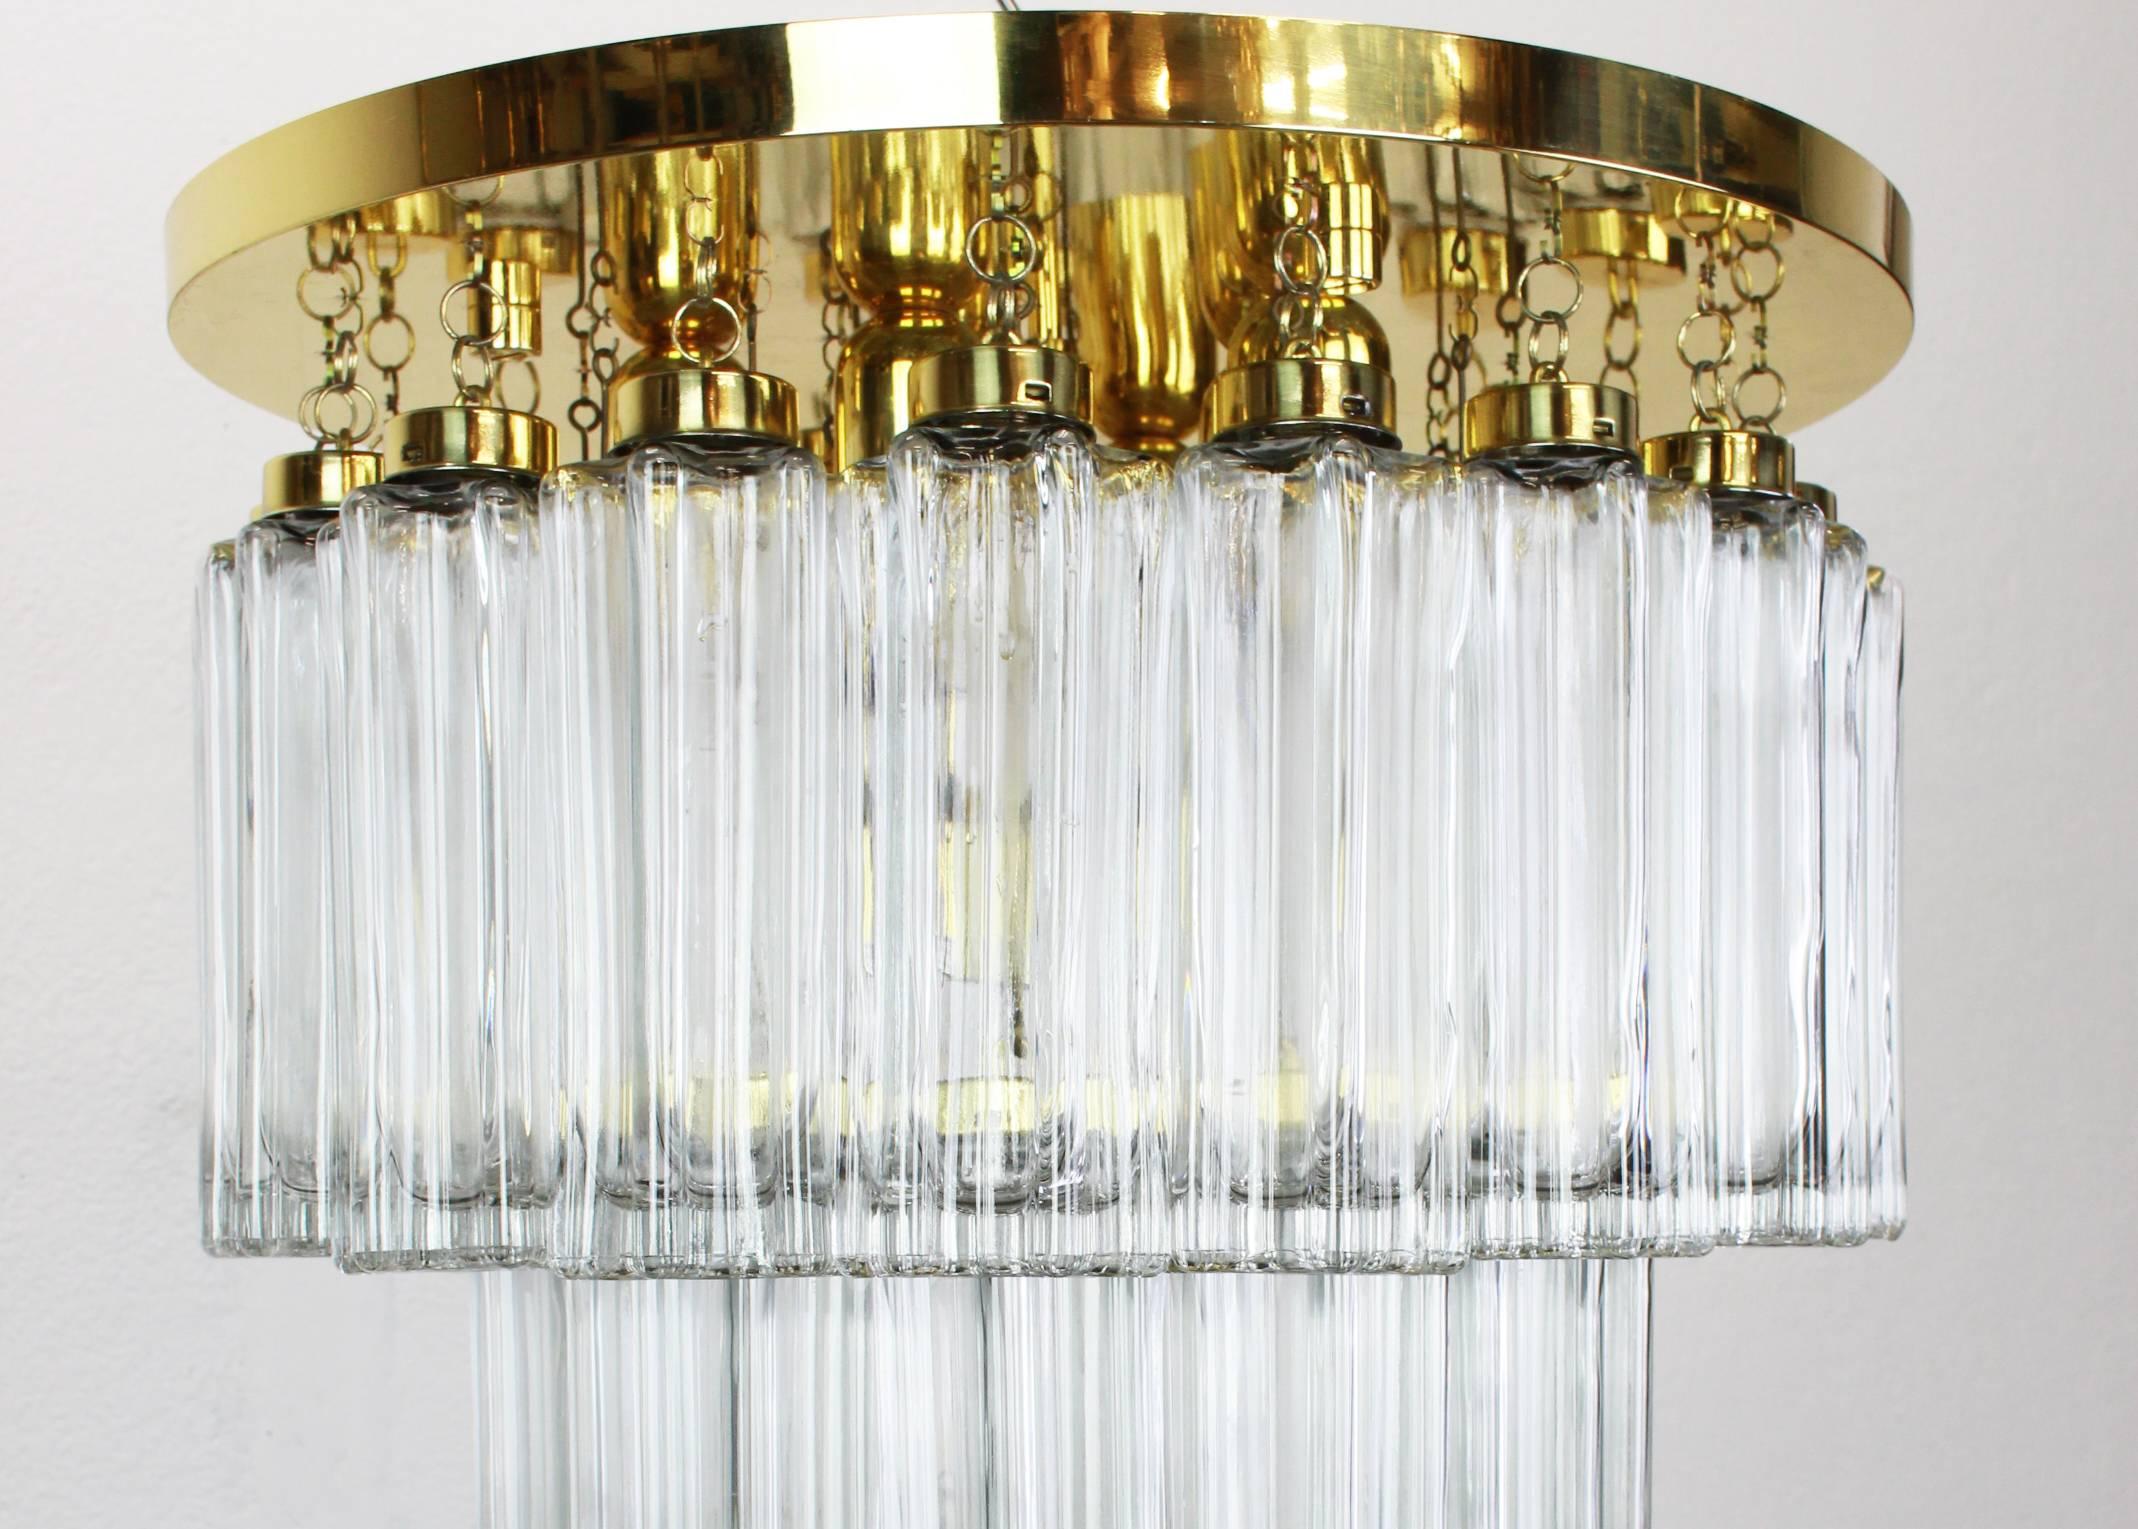 Rare three-tier flush mount or chandelier with handblown glass pieces on a brass base made by Glashütte Limburg.

Best of the 1960s from Germany.

High quality and in very good condition. Cleaned, well-wired and ready to use. 

The fixture requires